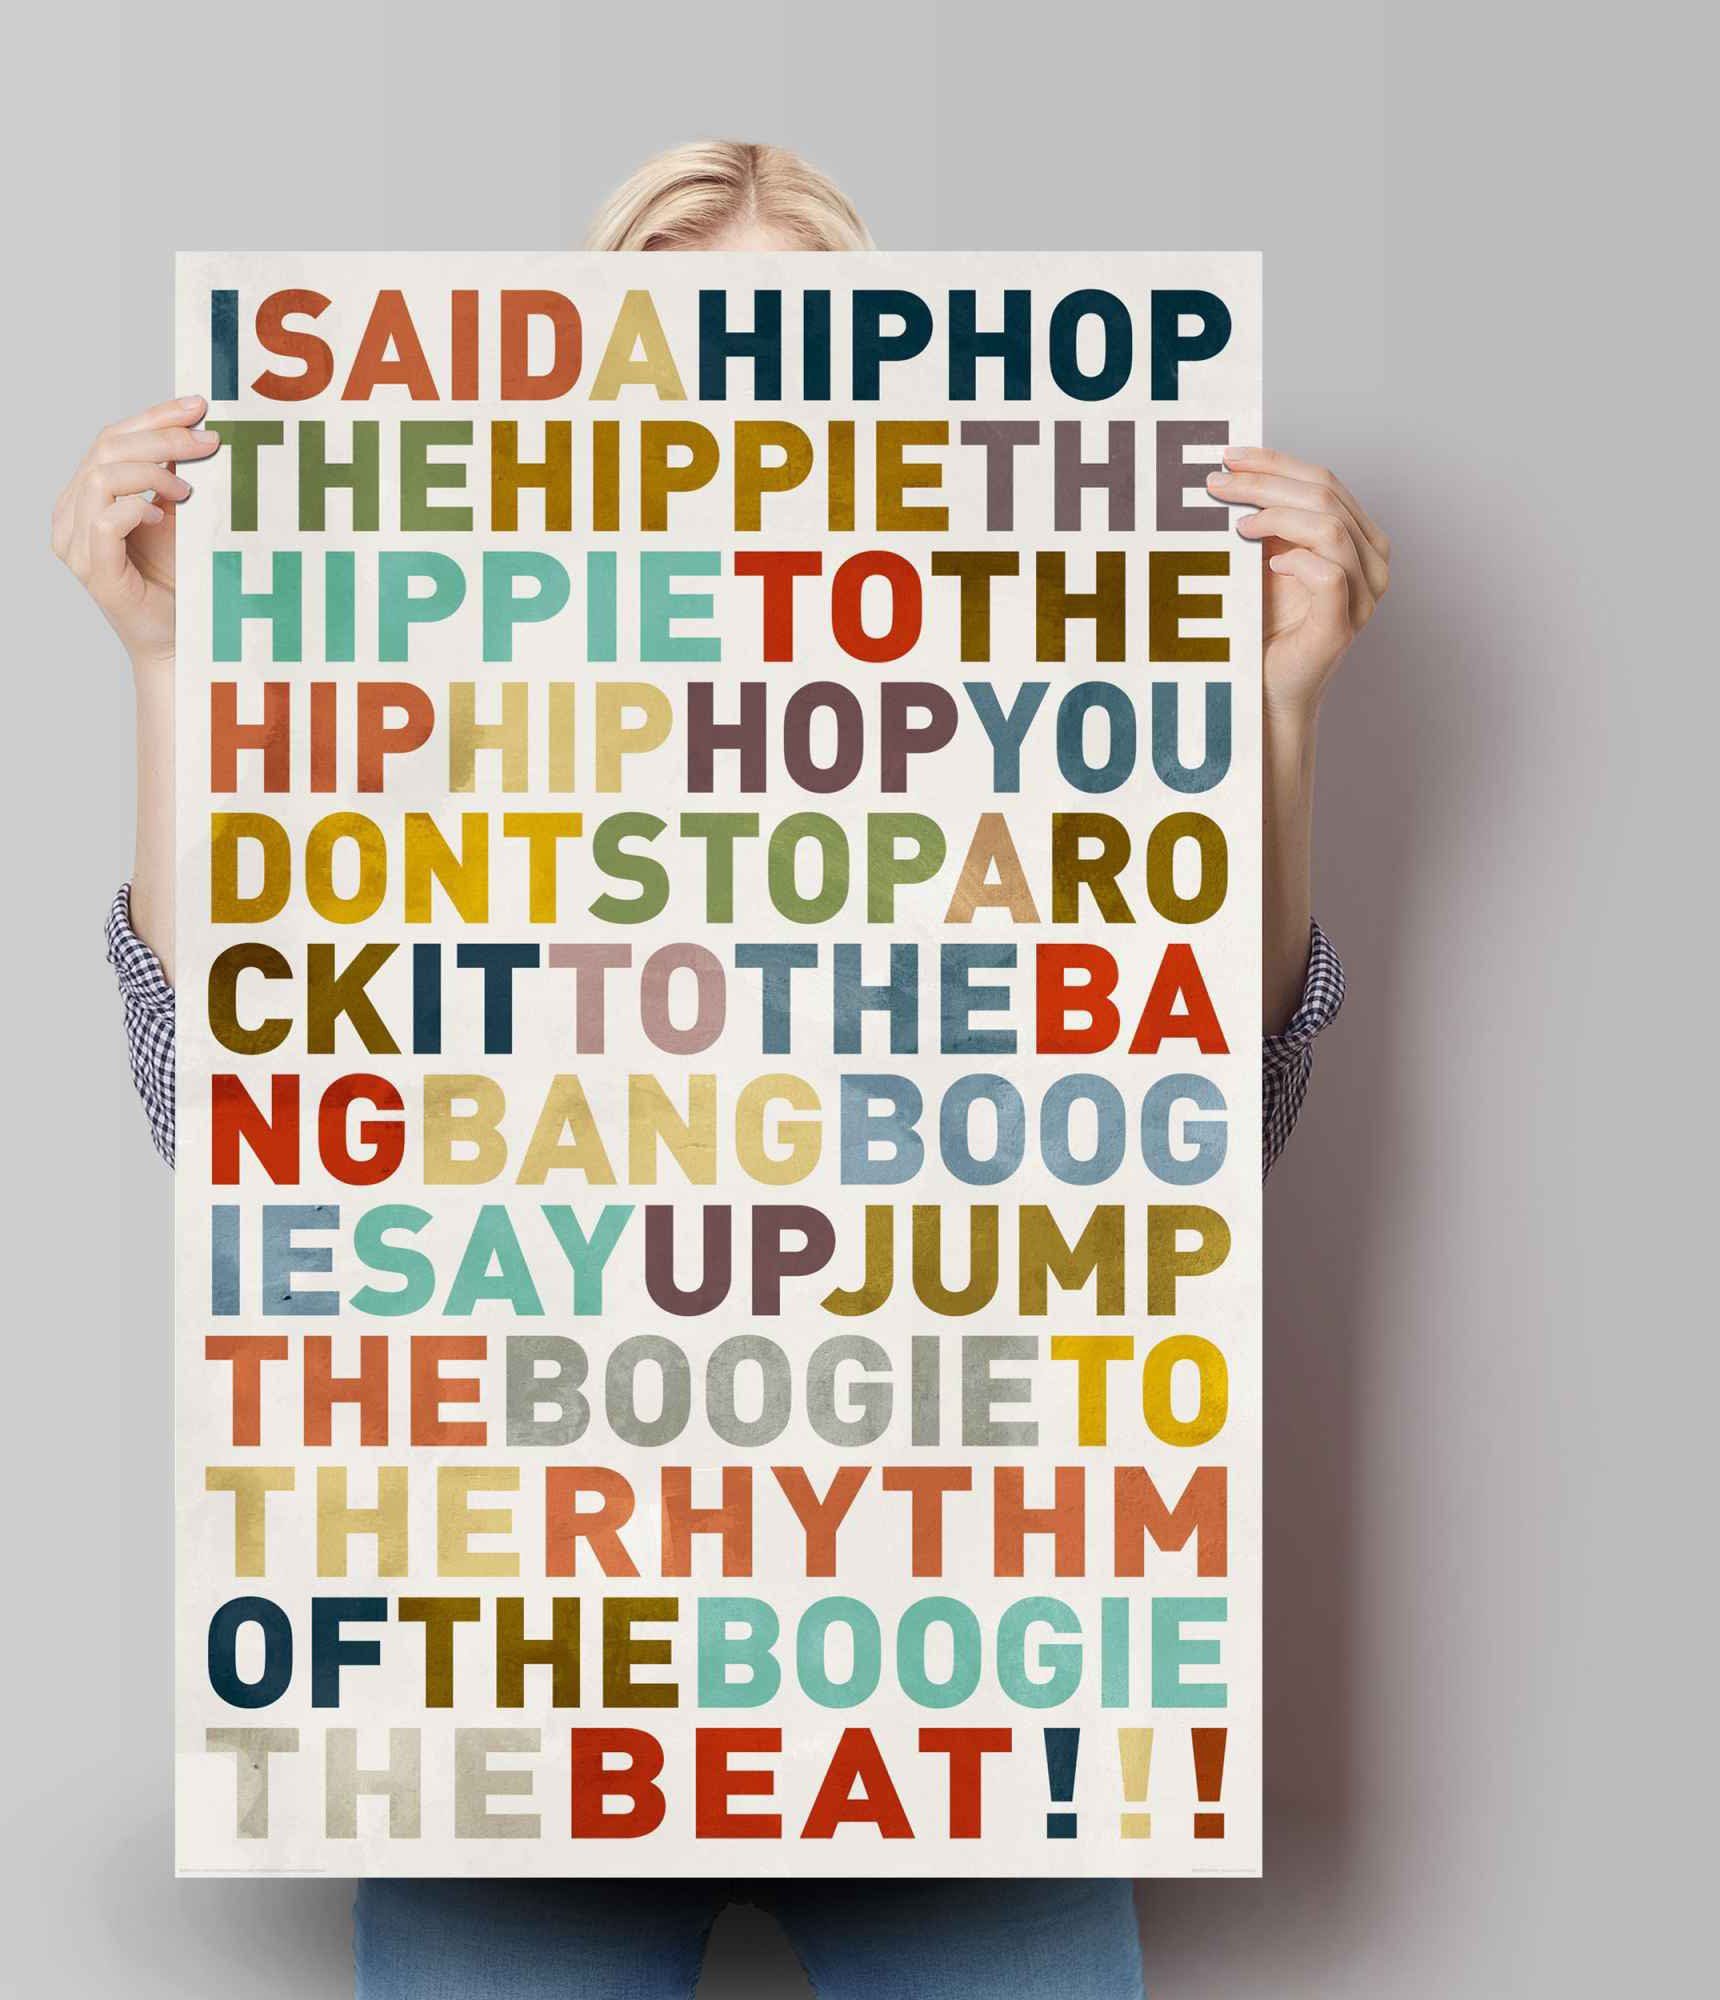 Reinders! Poster Poster I said HipHop - - Musik, Songtext Musiker - St) Farbig Hip-Hop a (1